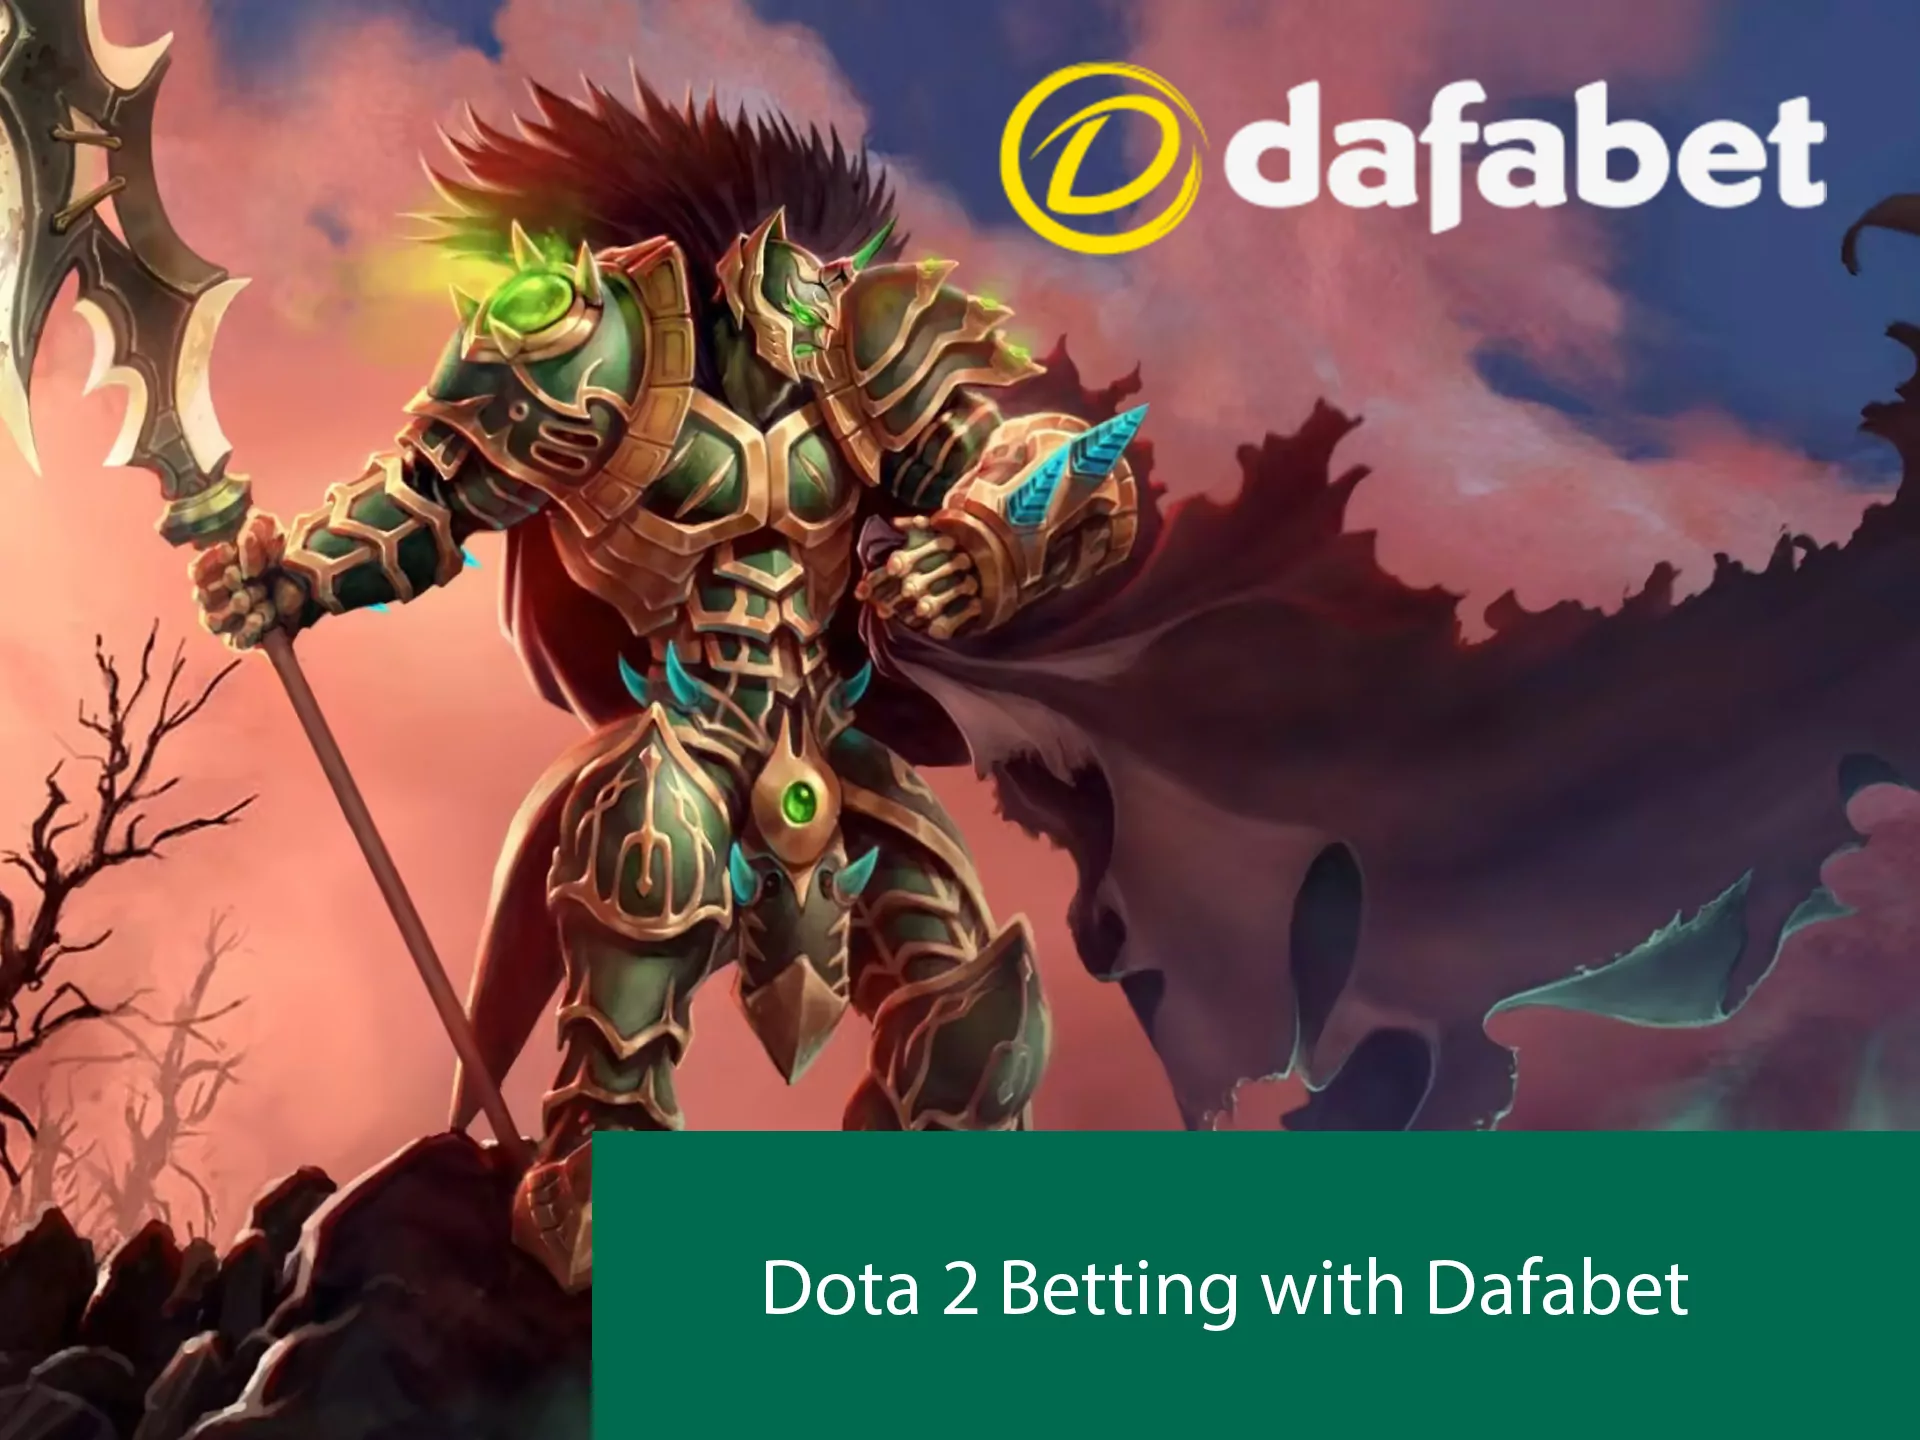 In Dafabet you can bet on Esports disciplines.